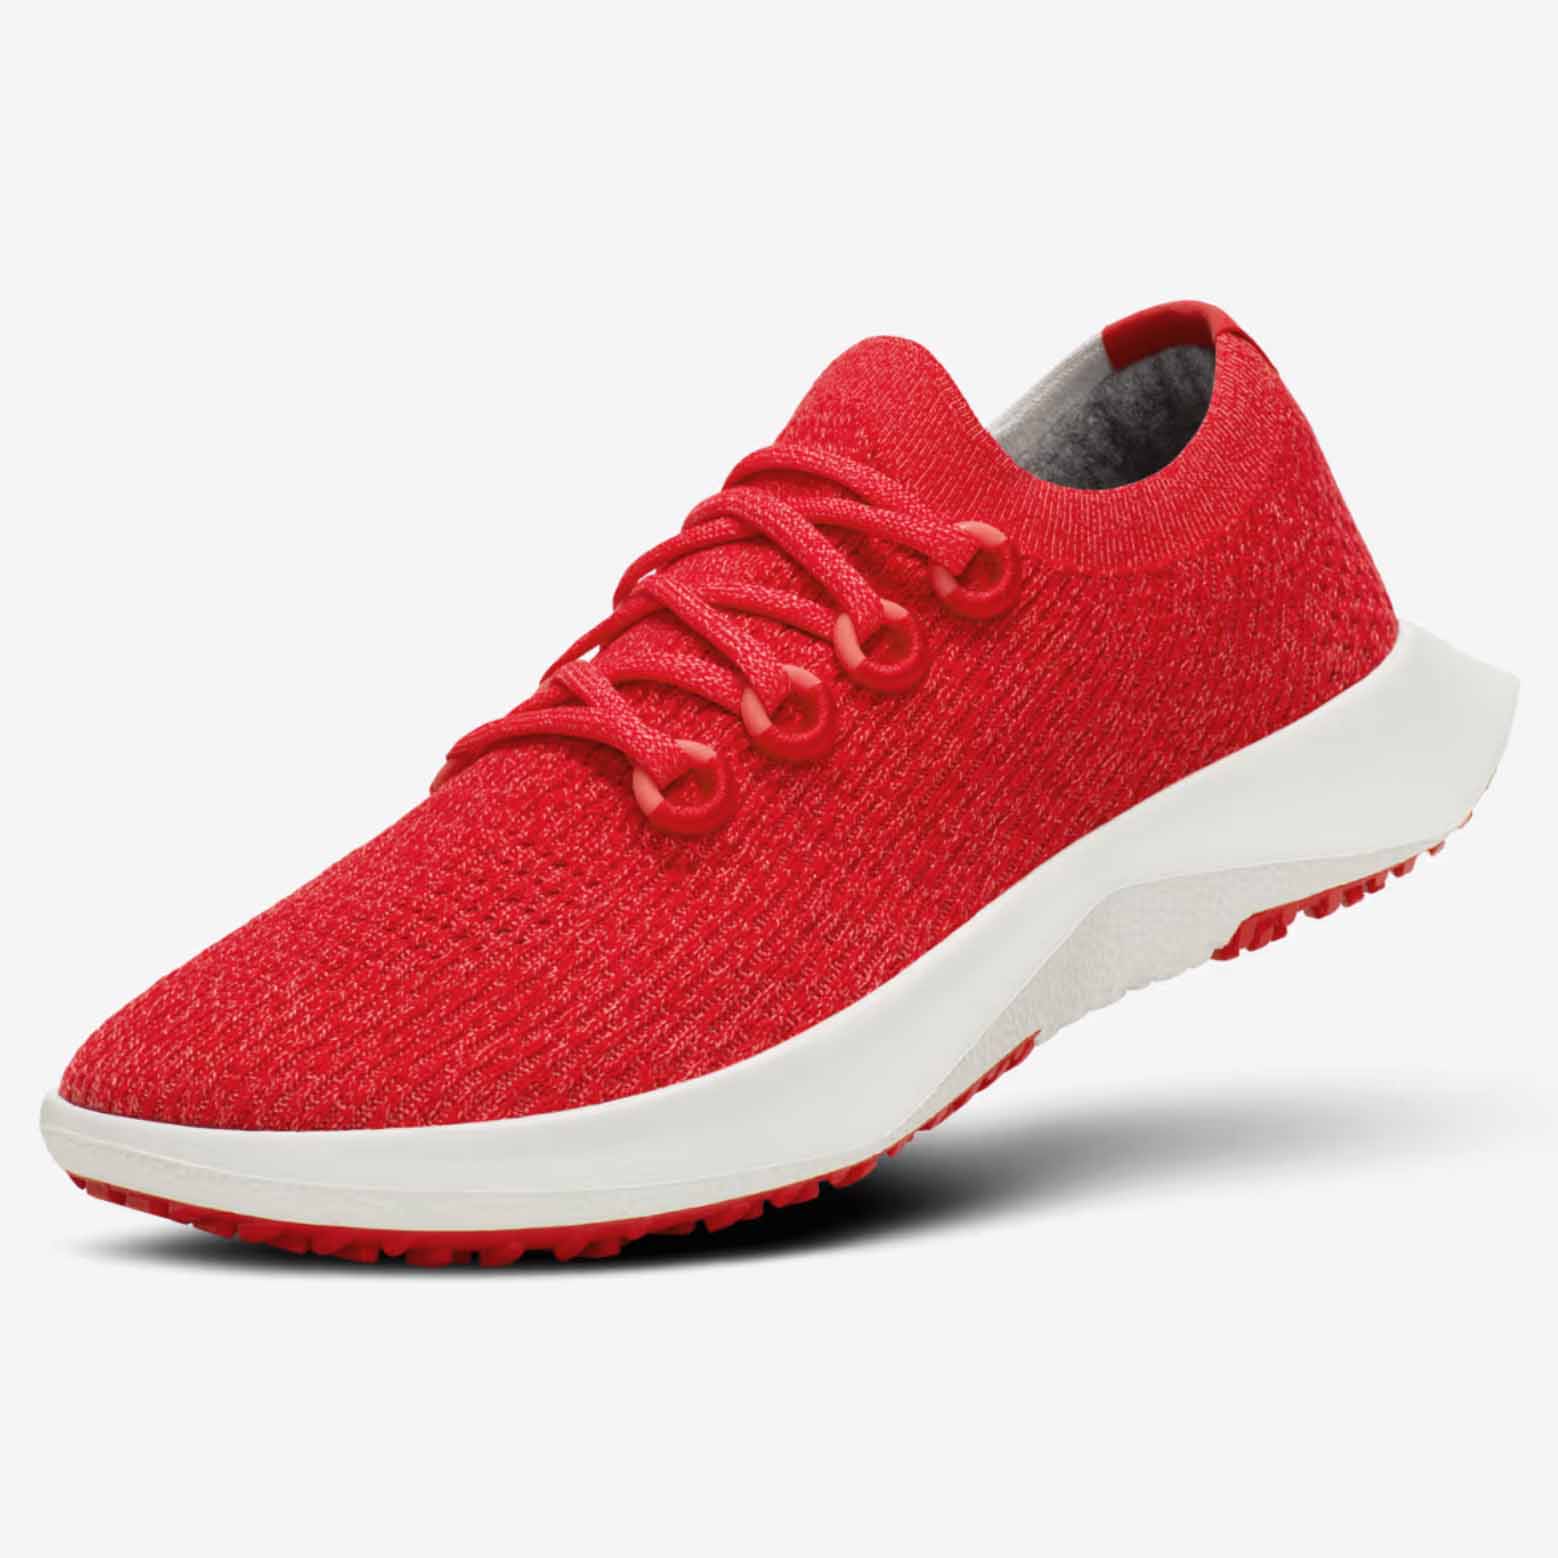 the Allbirds Women’s Tree Dasher 2 sneaker in red and white